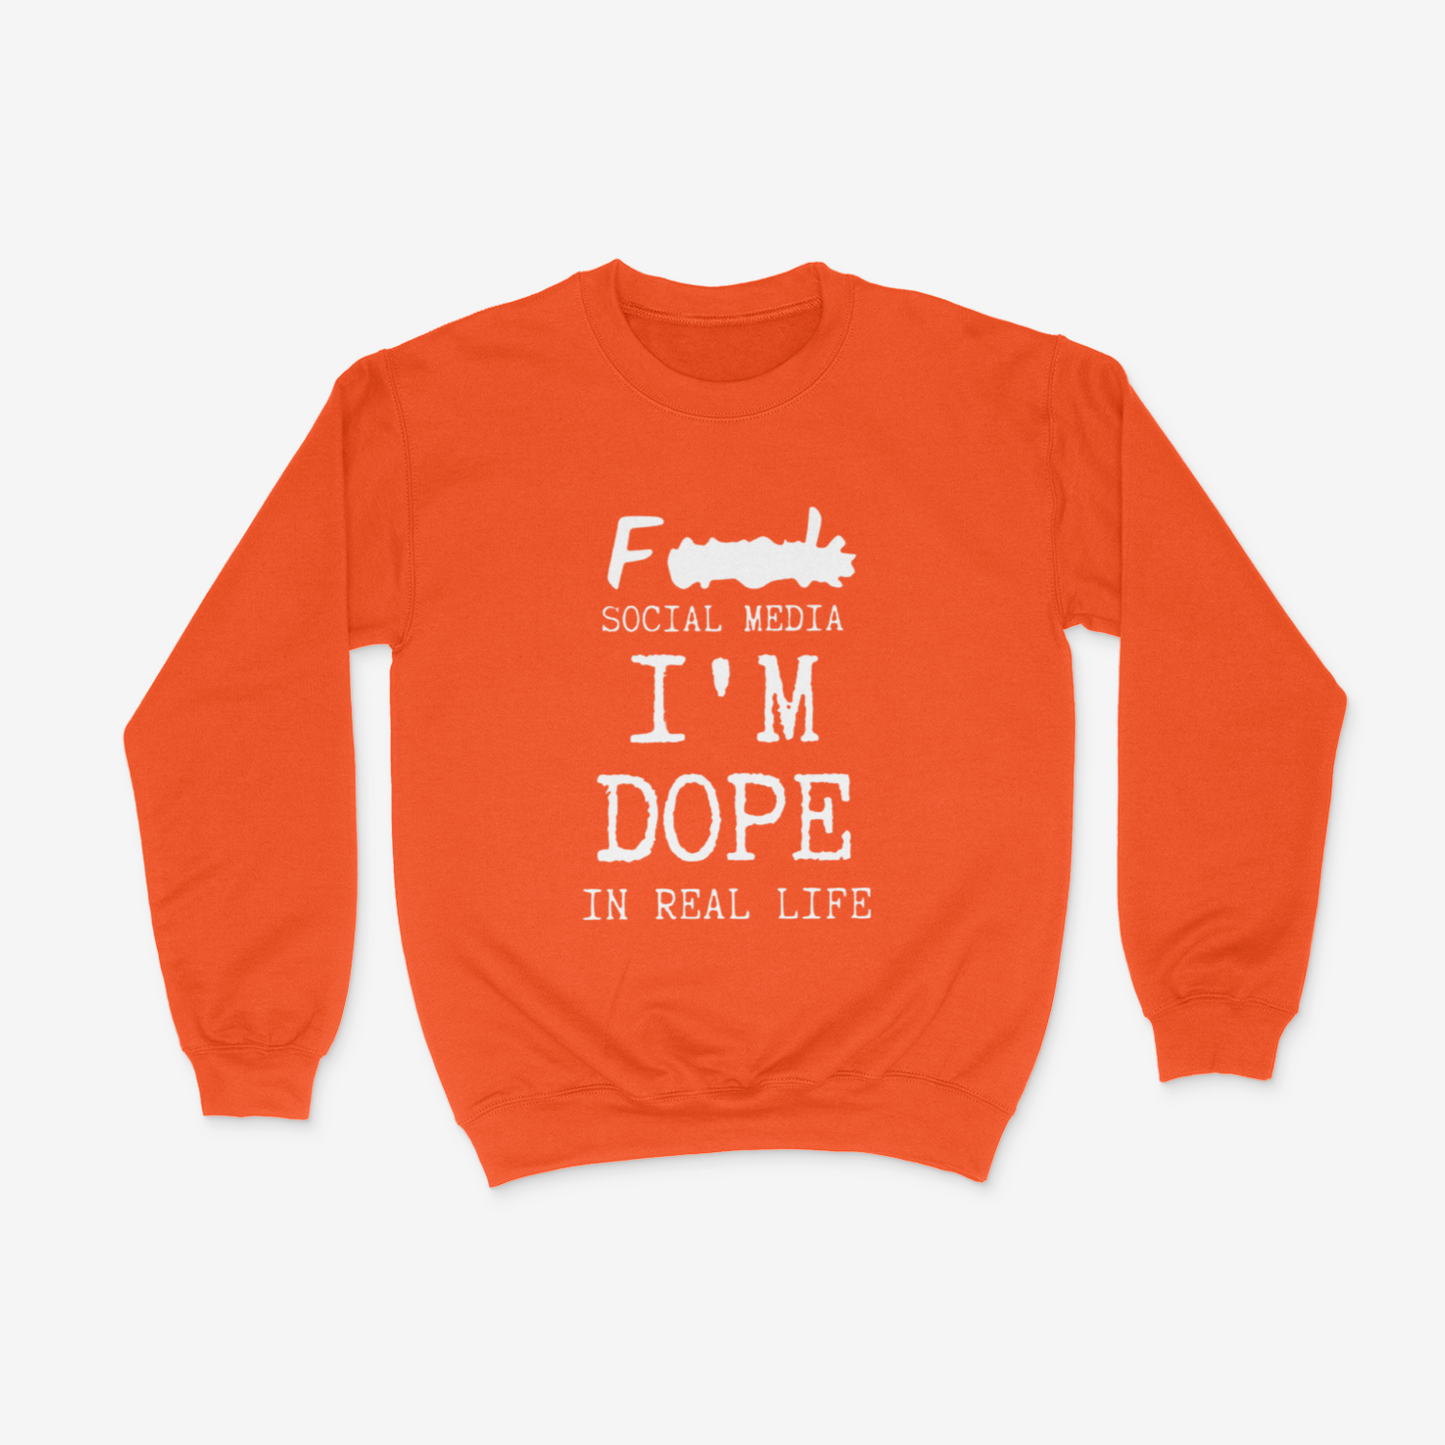 I'm Dope in Real Life Crewneck